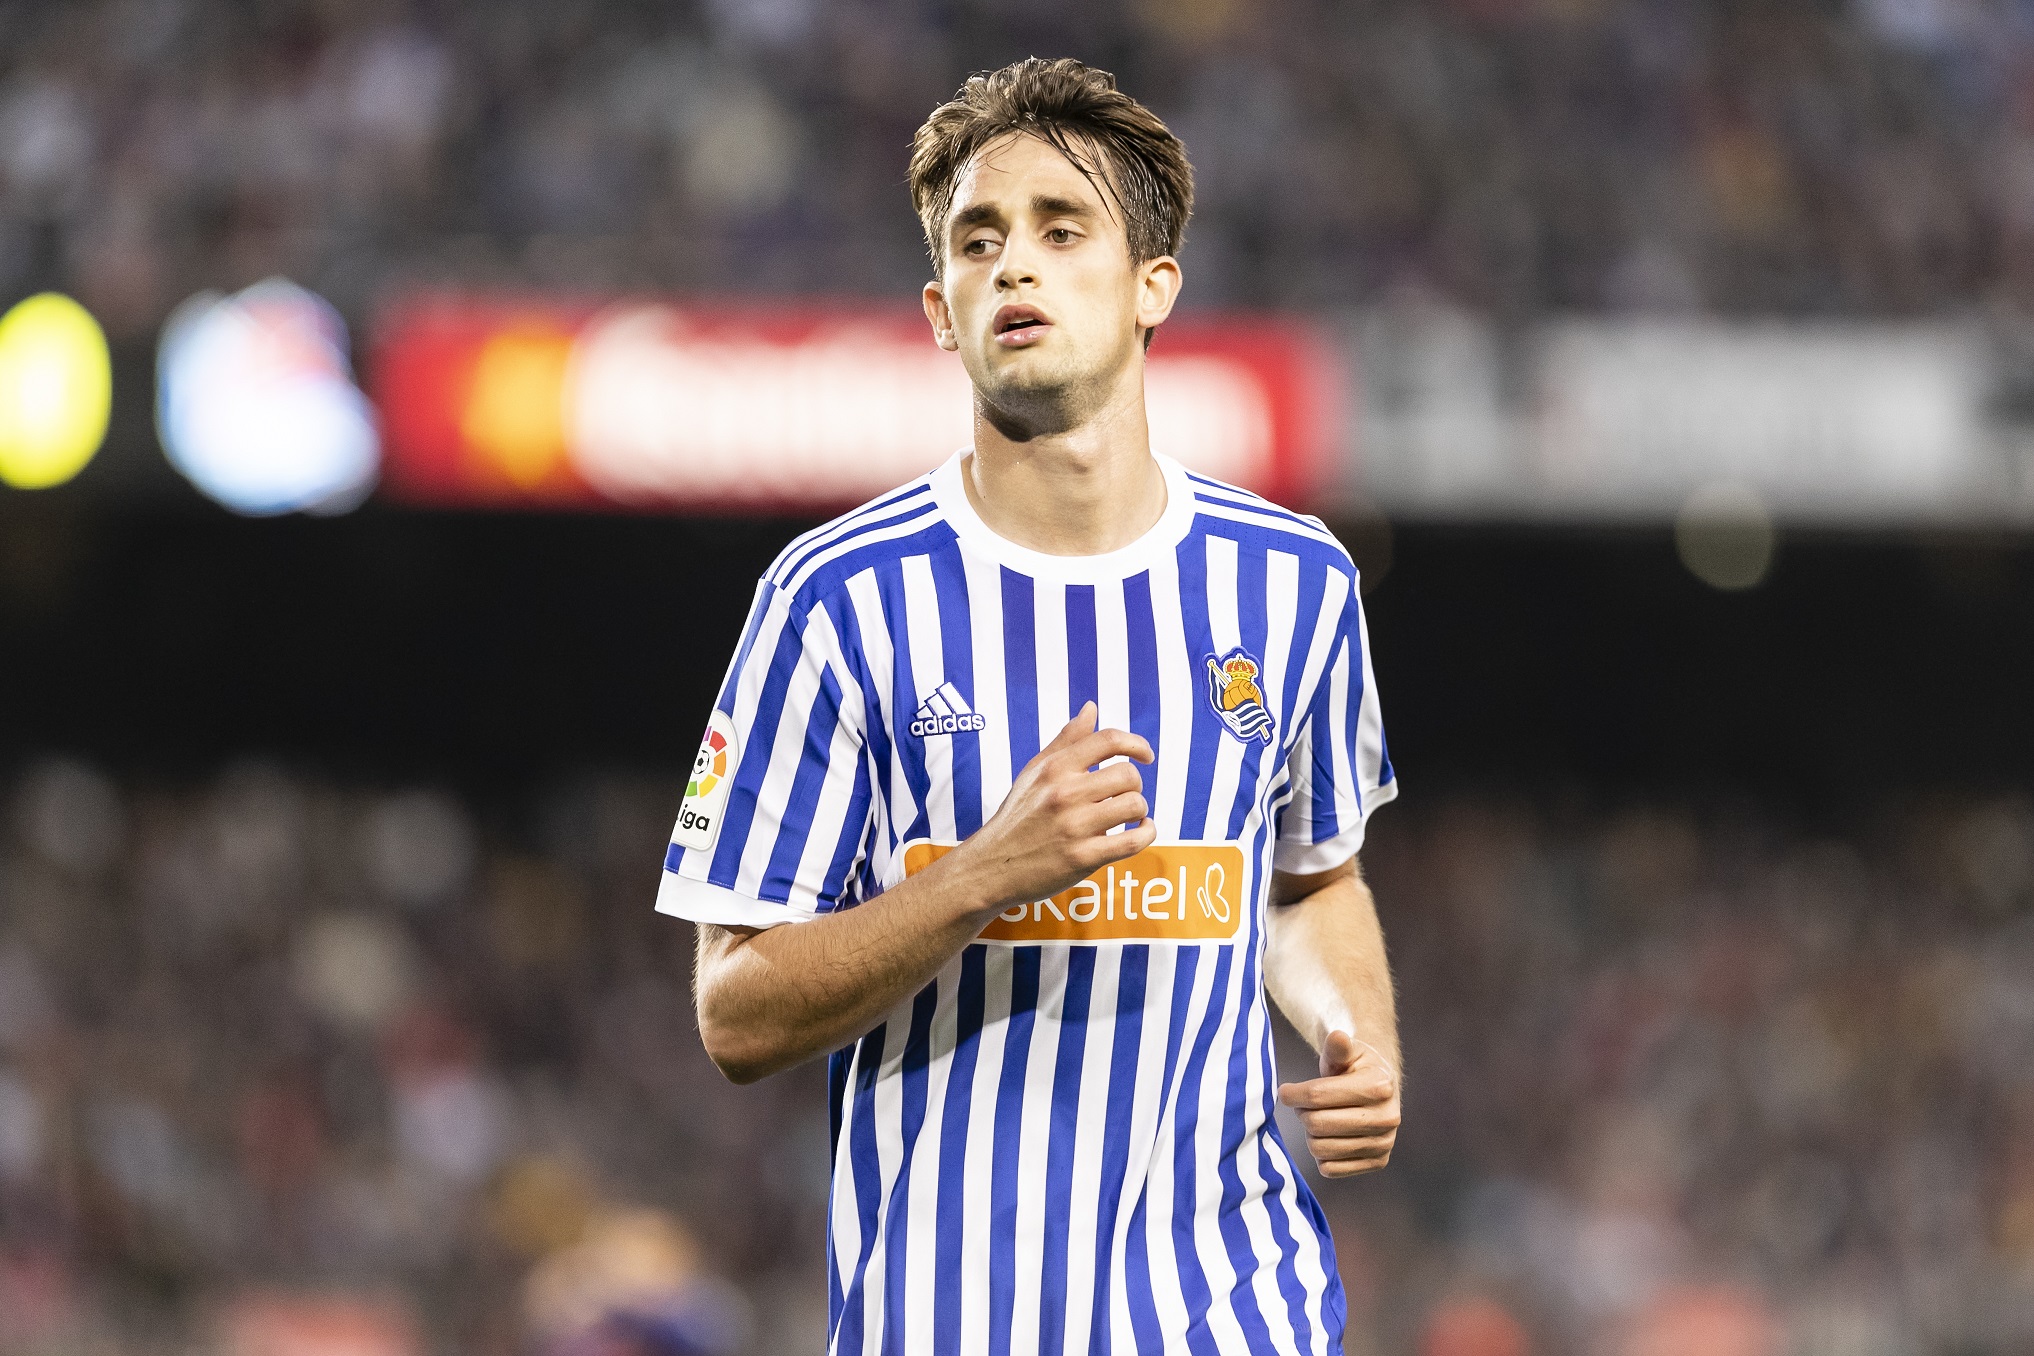 Real Sociedad midfielder Adnan Januzaj (8) during the match between FC Barcelona against Real Sociedad, for the round 38 of the Liga Santander, played at Camp Nou Stadium on 20th May 2018 in Barcelona, Spain.